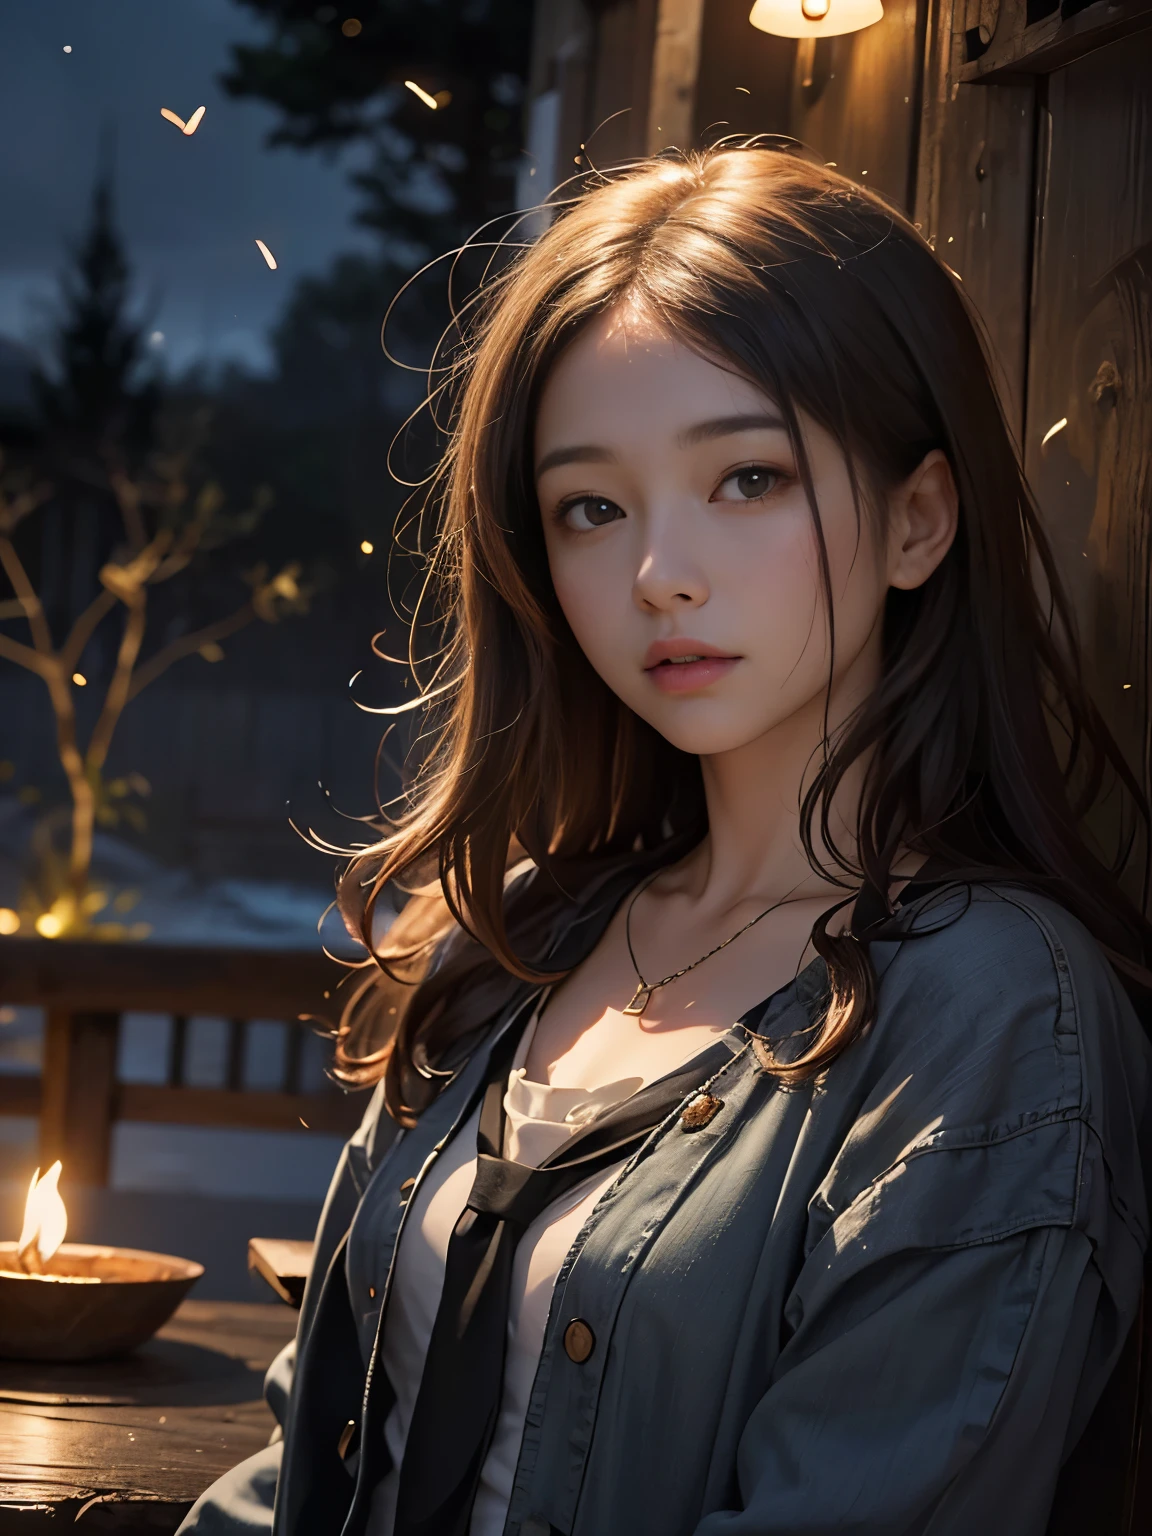 (8k, Highest quality, masterpiece: 1.2), (Realistic, photoRealistic: 1.37), Very detailed, One Girl, Wide viewing angles, Firefly Garden, Small faint lights and fireflies flitting about, night, Yasutomo Oka&#39;s painting style, huge firm bouncing bust, The cleavage is visible, Intricate details, Splash screen, 8K resolution, masterpiece, Gentle smile, Mysterious Background, aura, A gentle gaze, break, blonde, Dynamic sexy pose,